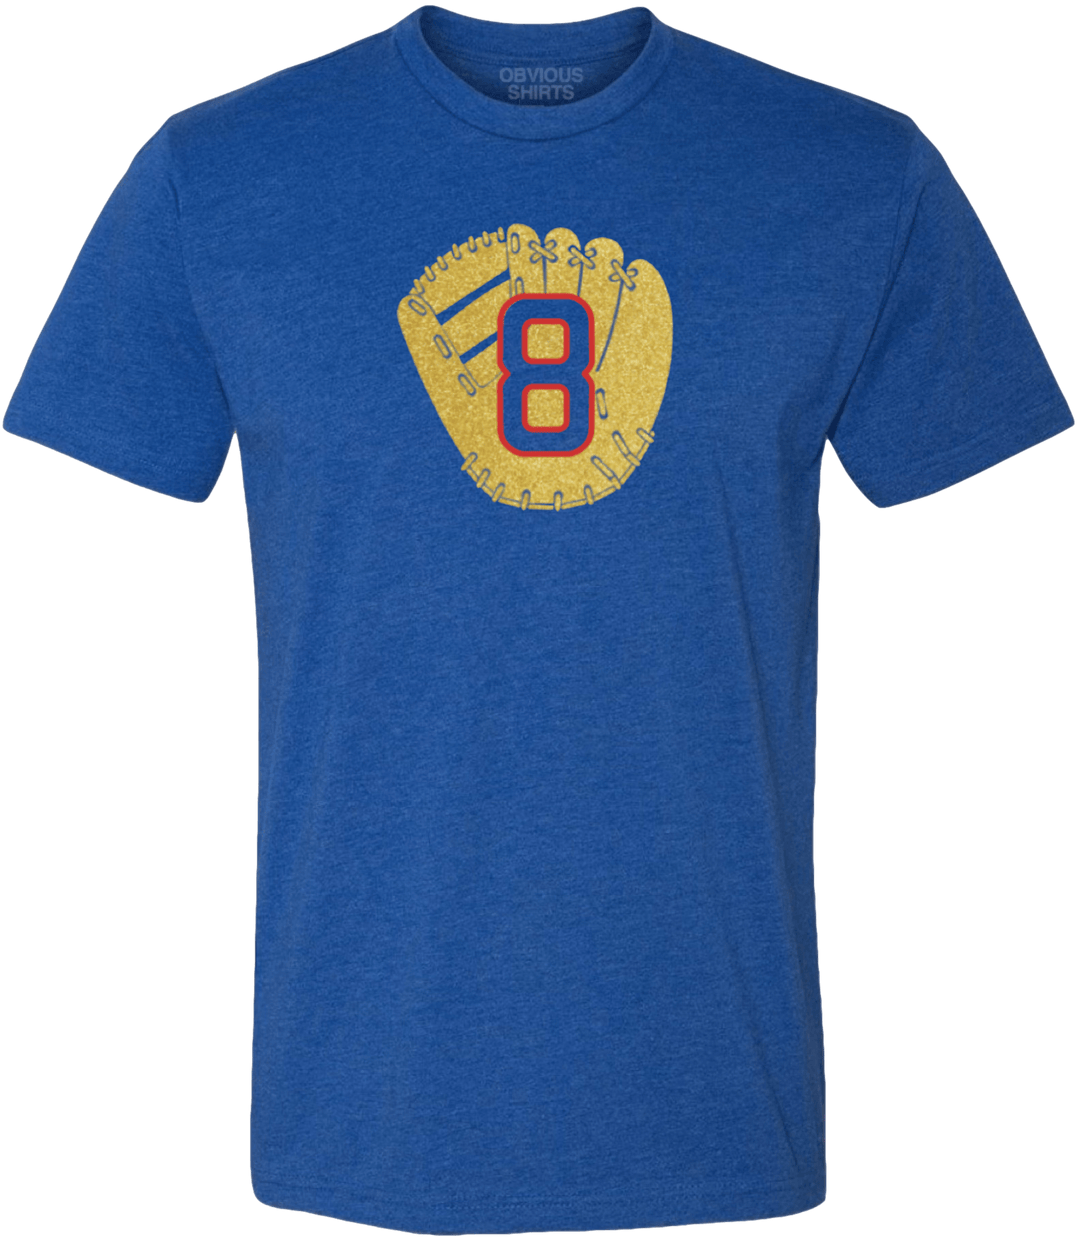 GOLD GLOVE. - OBVIOUS SHIRTS